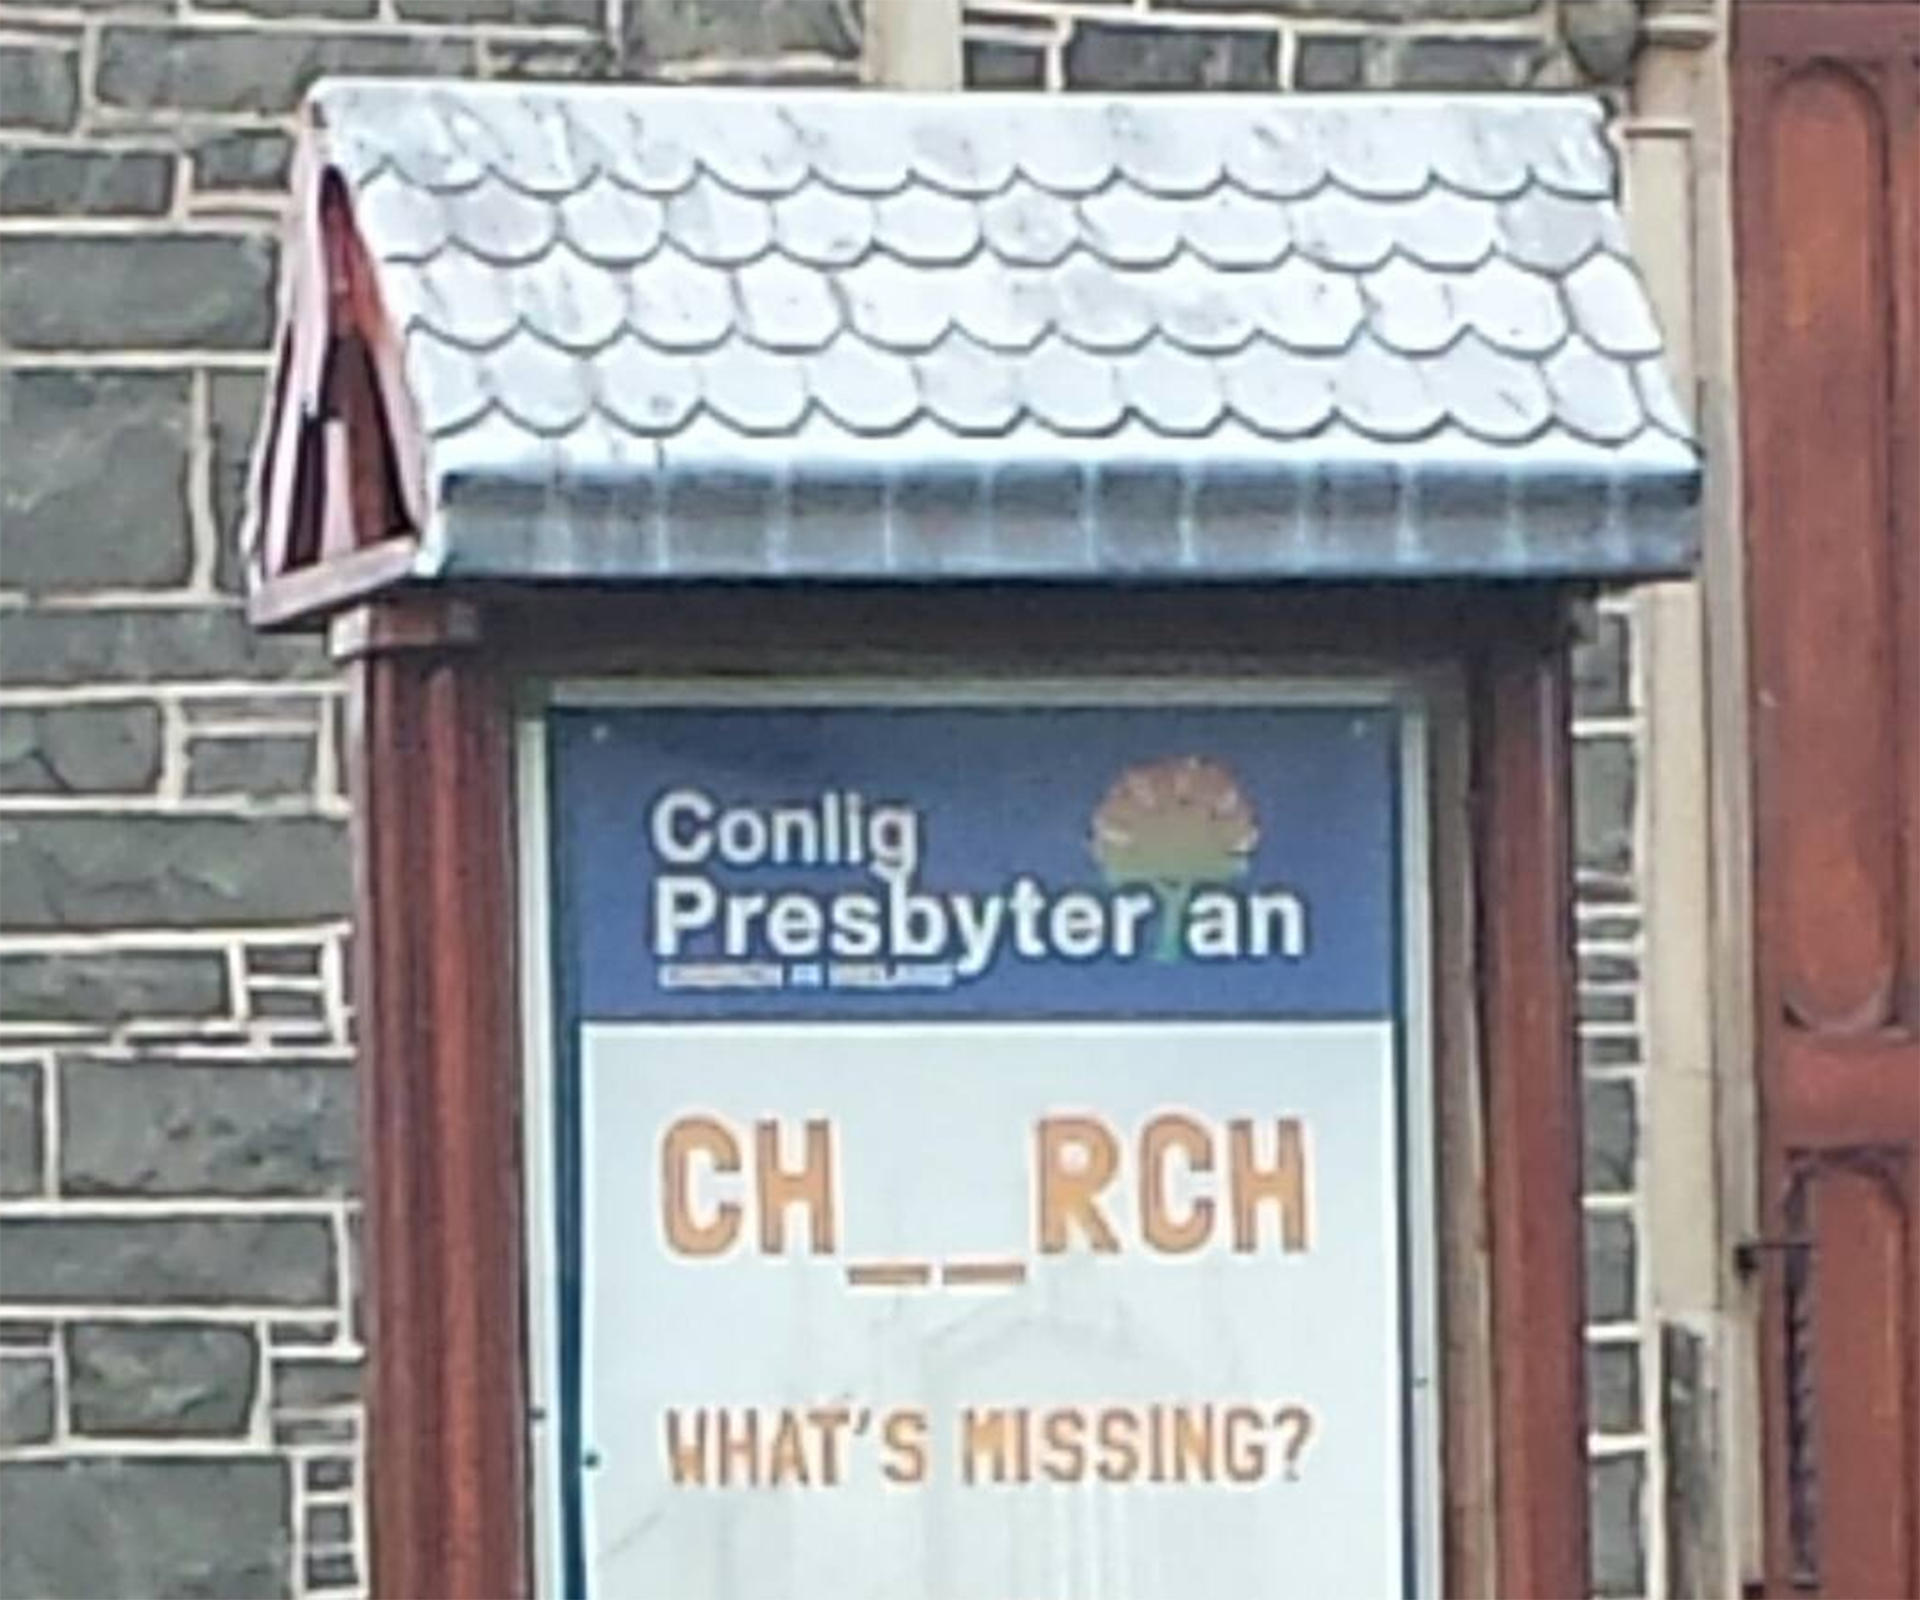 Oops! Church’s embarrassing sign mistake goes viral